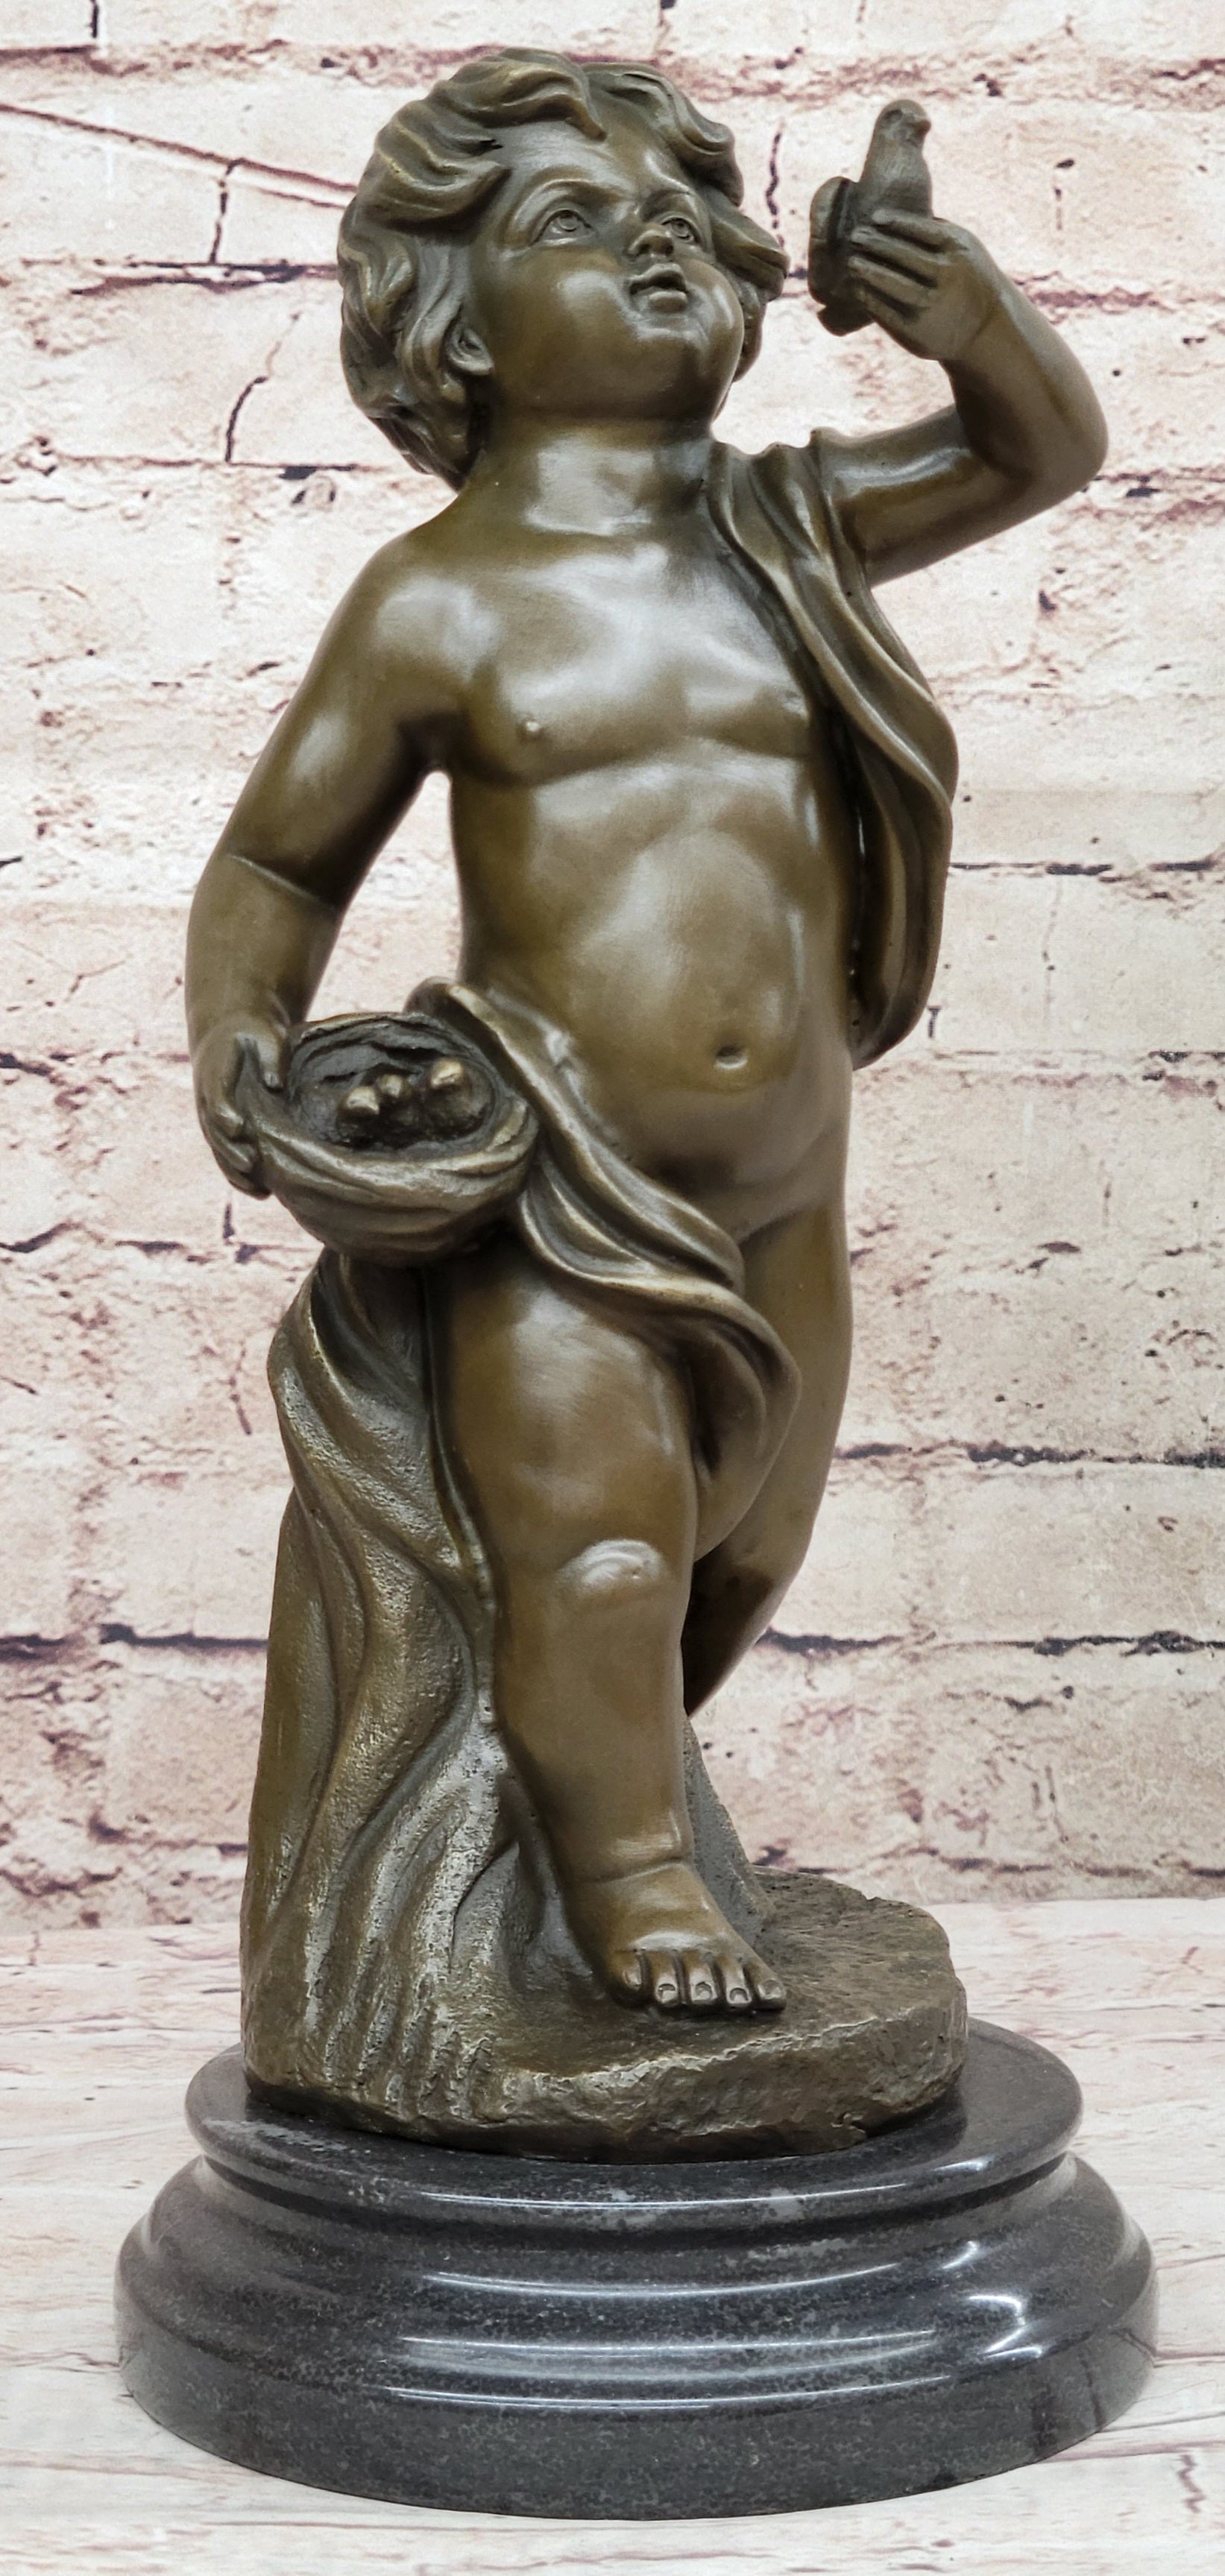 100% Solid Bronze Sculpture of a Stading Holding a Bird Art Deco Marble Sale